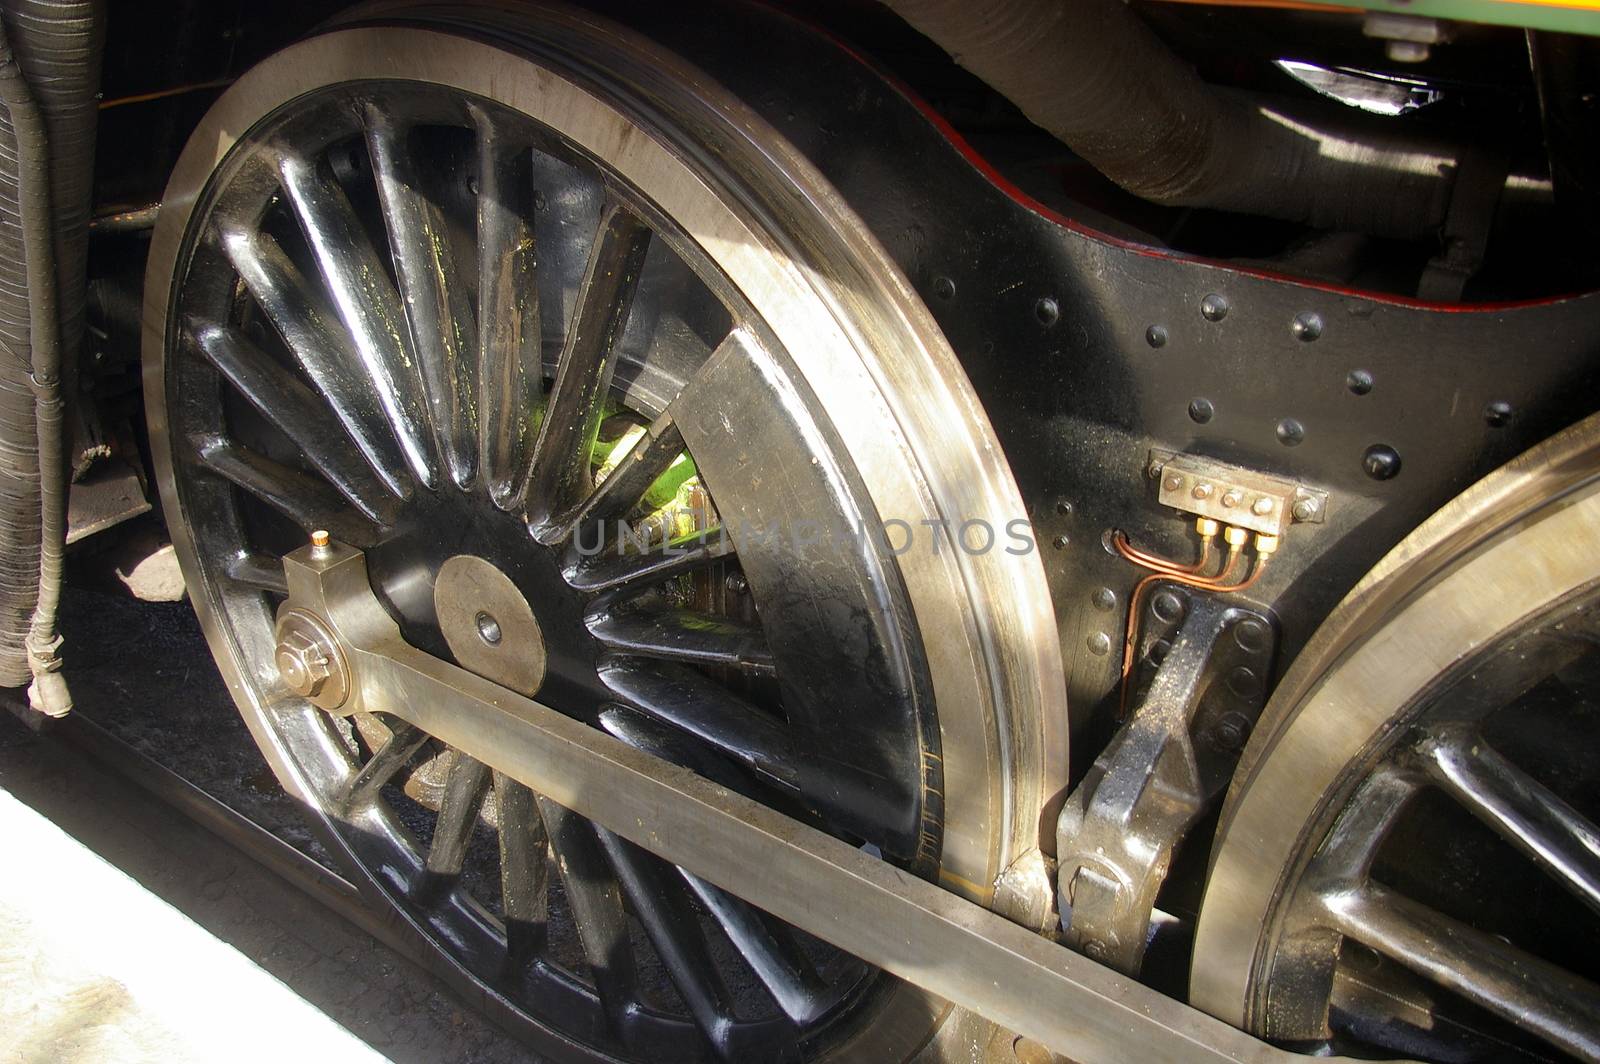 Wheel assembly on a powerful steam locomotive